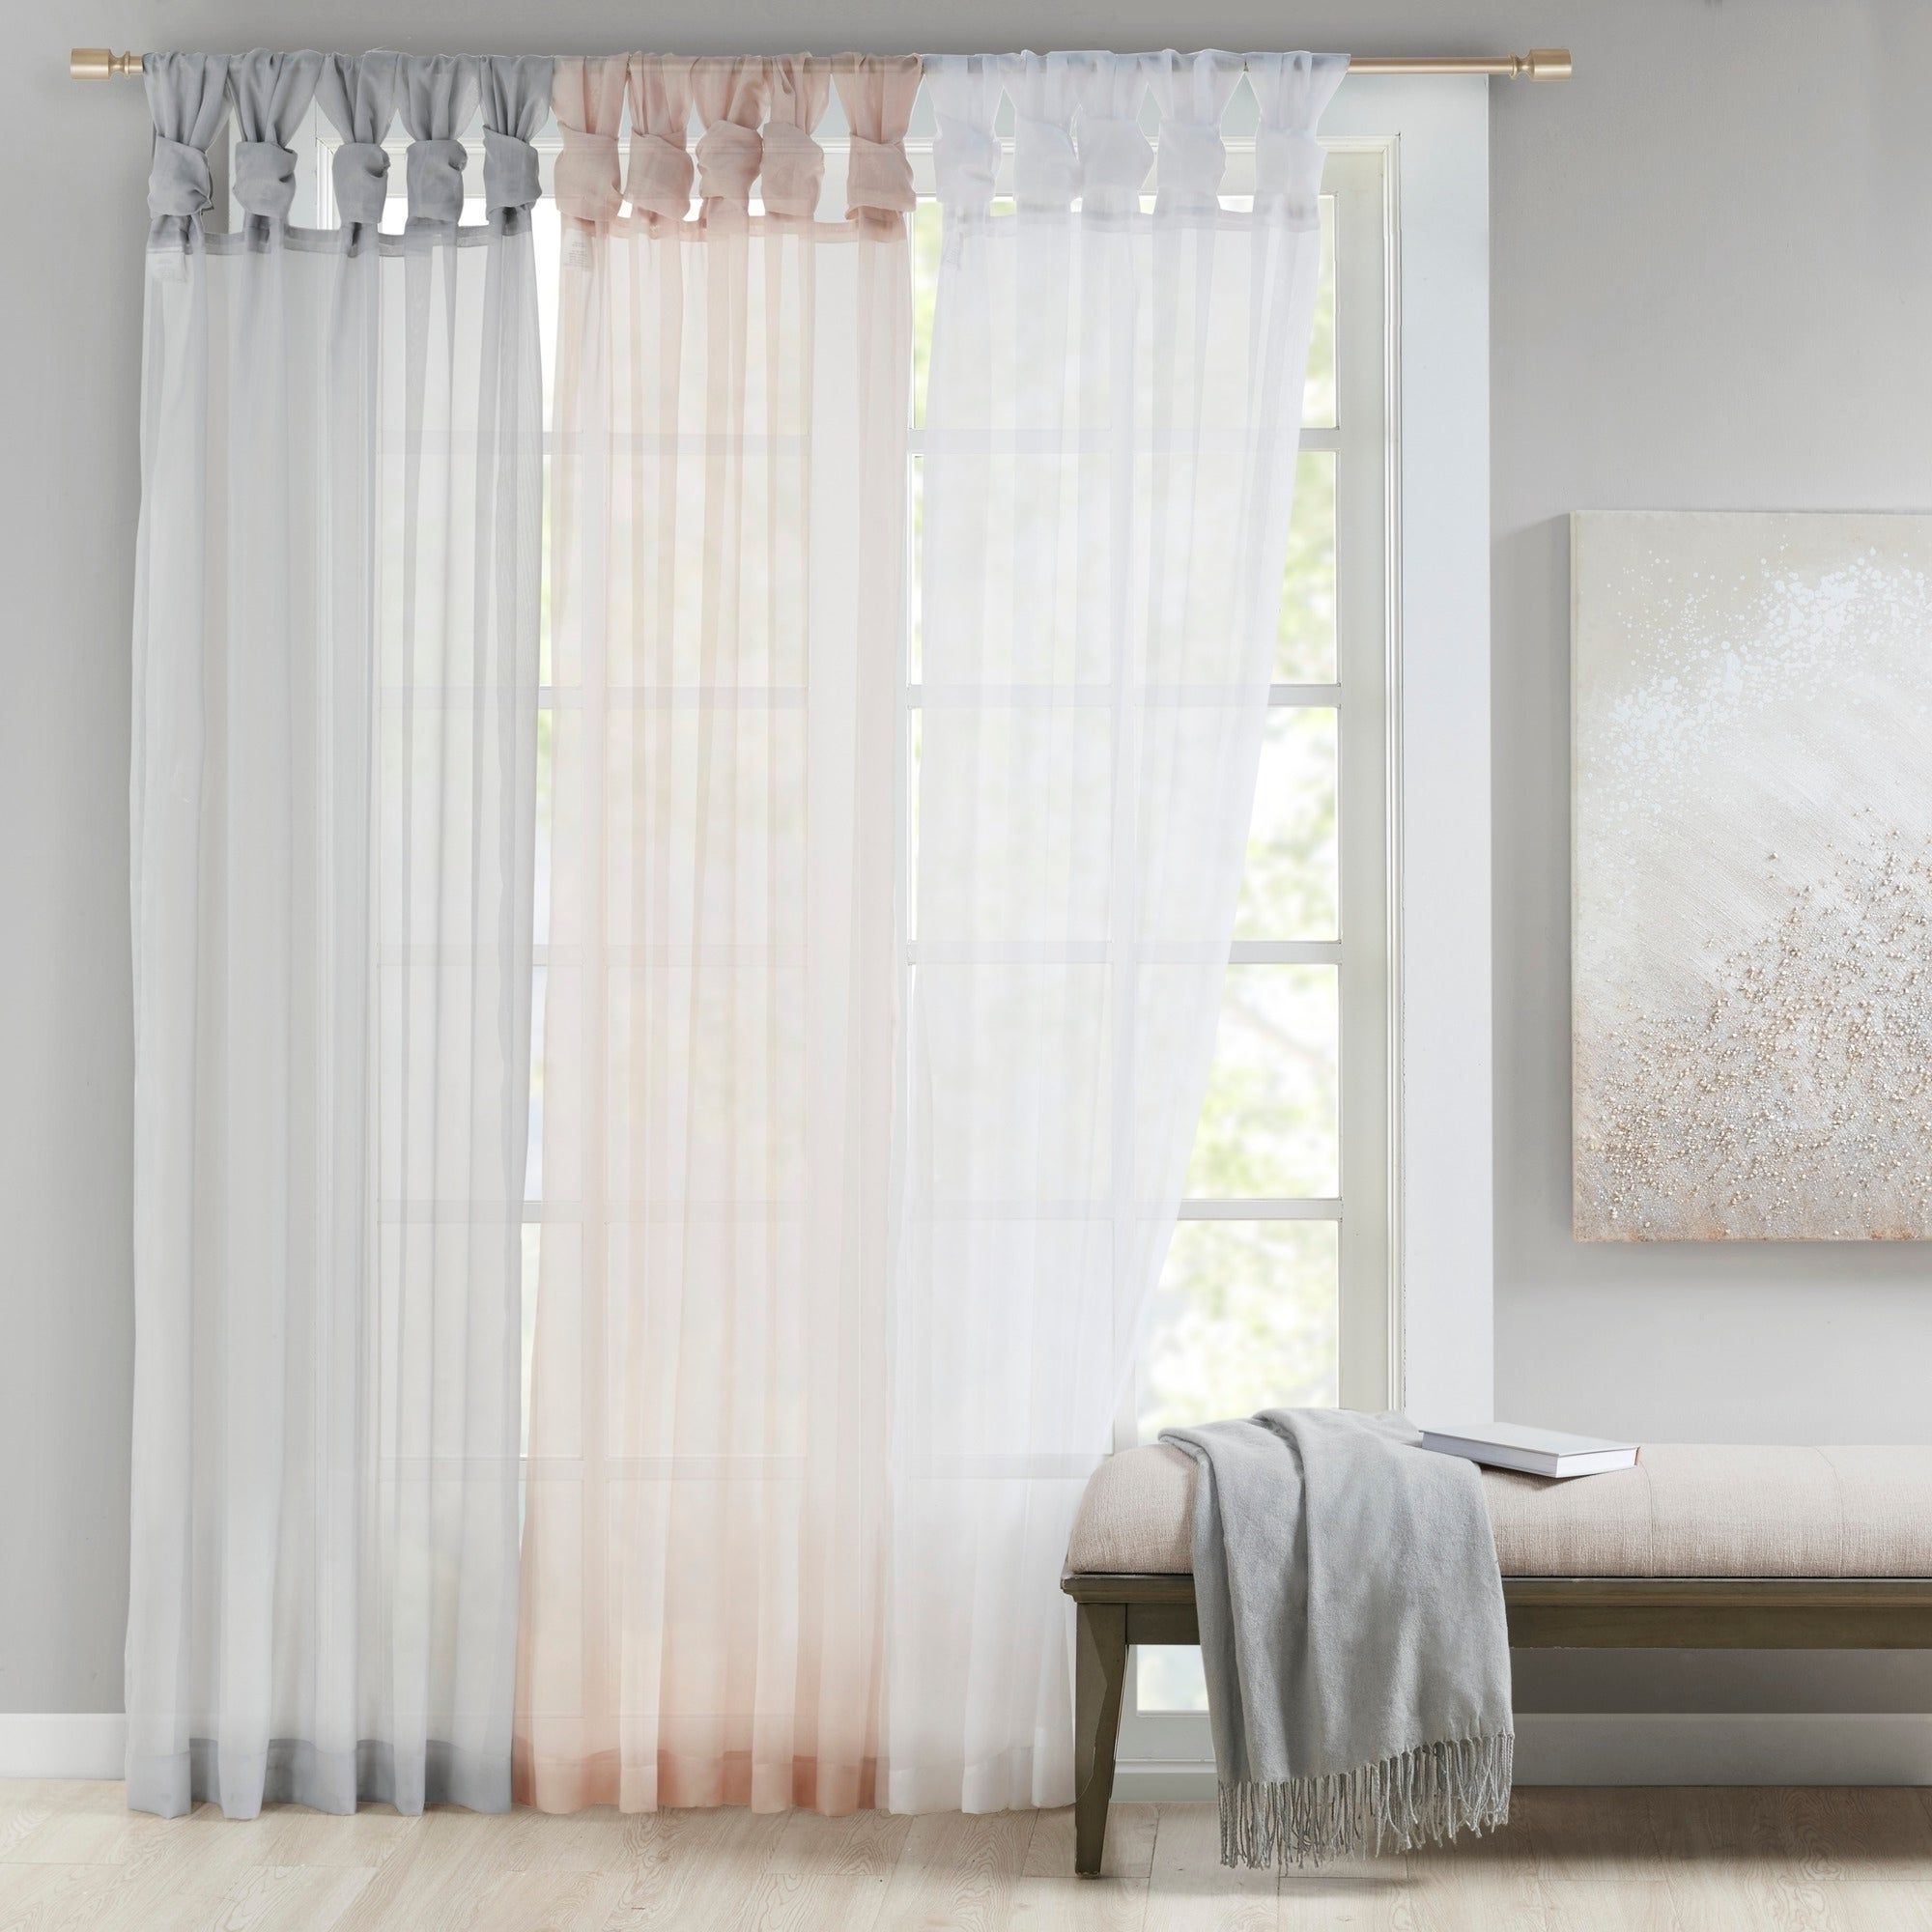 Best And Newest Elowen White Twist Tab Voile Sheer Curtain Panel Pairs Regarding Madison Park Elowen White Twist Tab Voile Sheer Curtain Panel Pair (View 1 of 20)